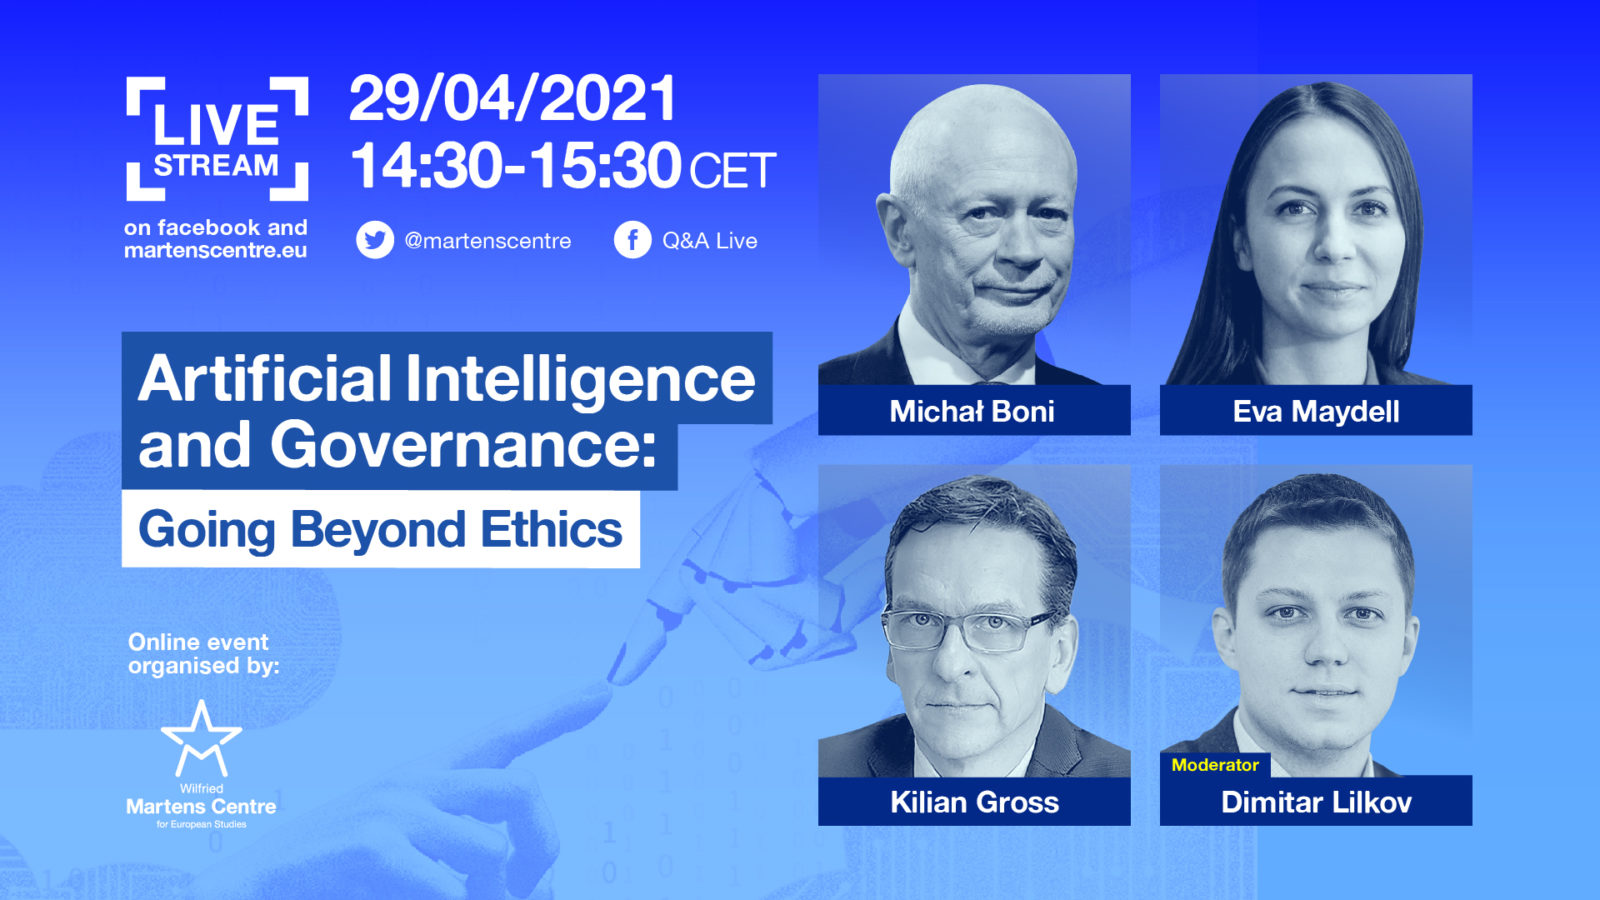 Artificial Intelligence and Governance: Going Beyond Ethics